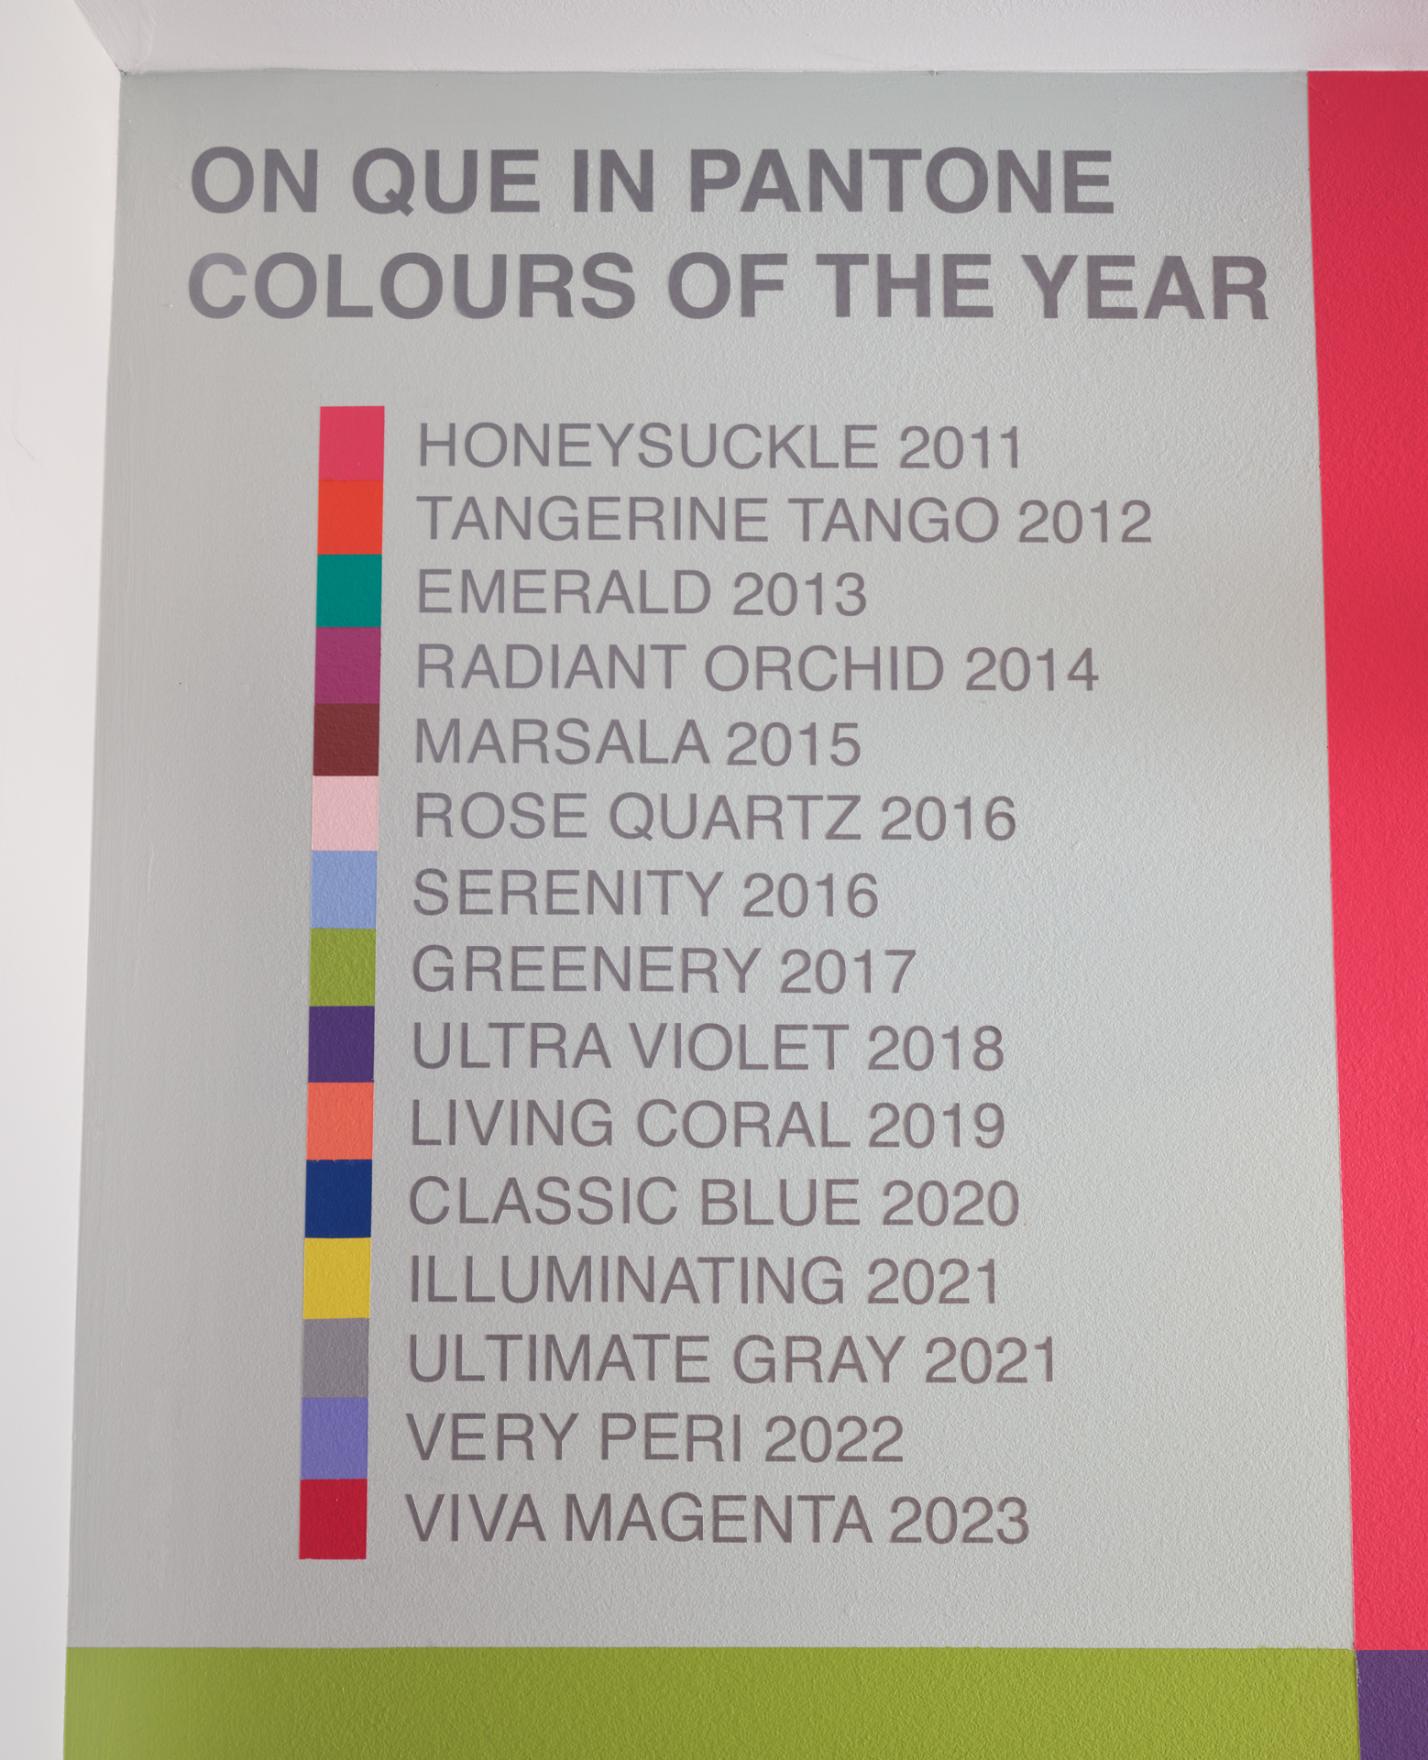 On Que in Pantone Colours of the Year, permanent installation, Lobby, On Que, 2511 Quebec St, Vancouver